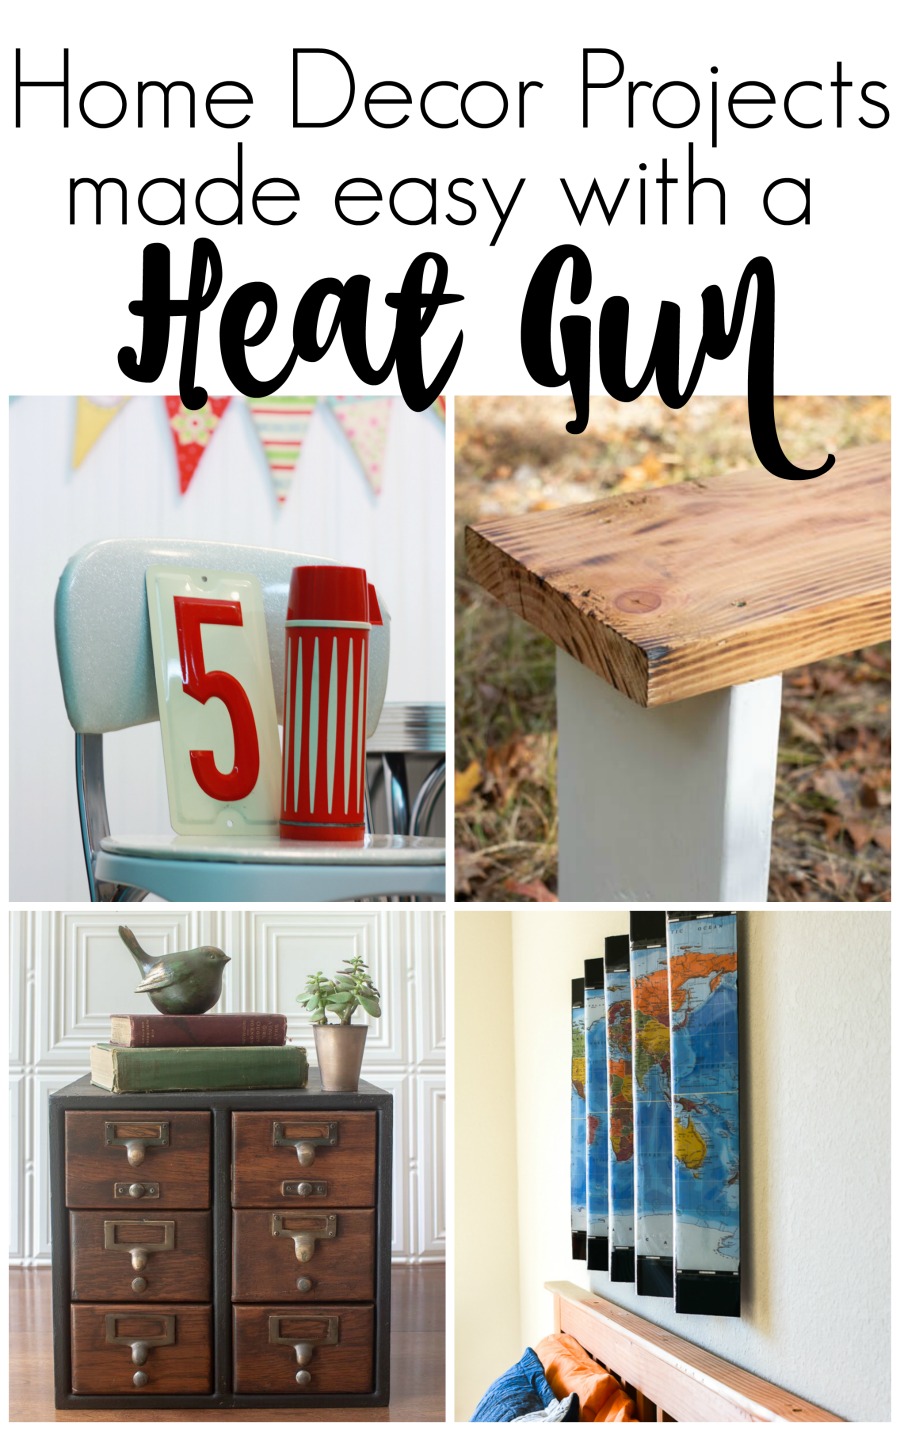 Home Decor Projects made easy with a Heat Gun